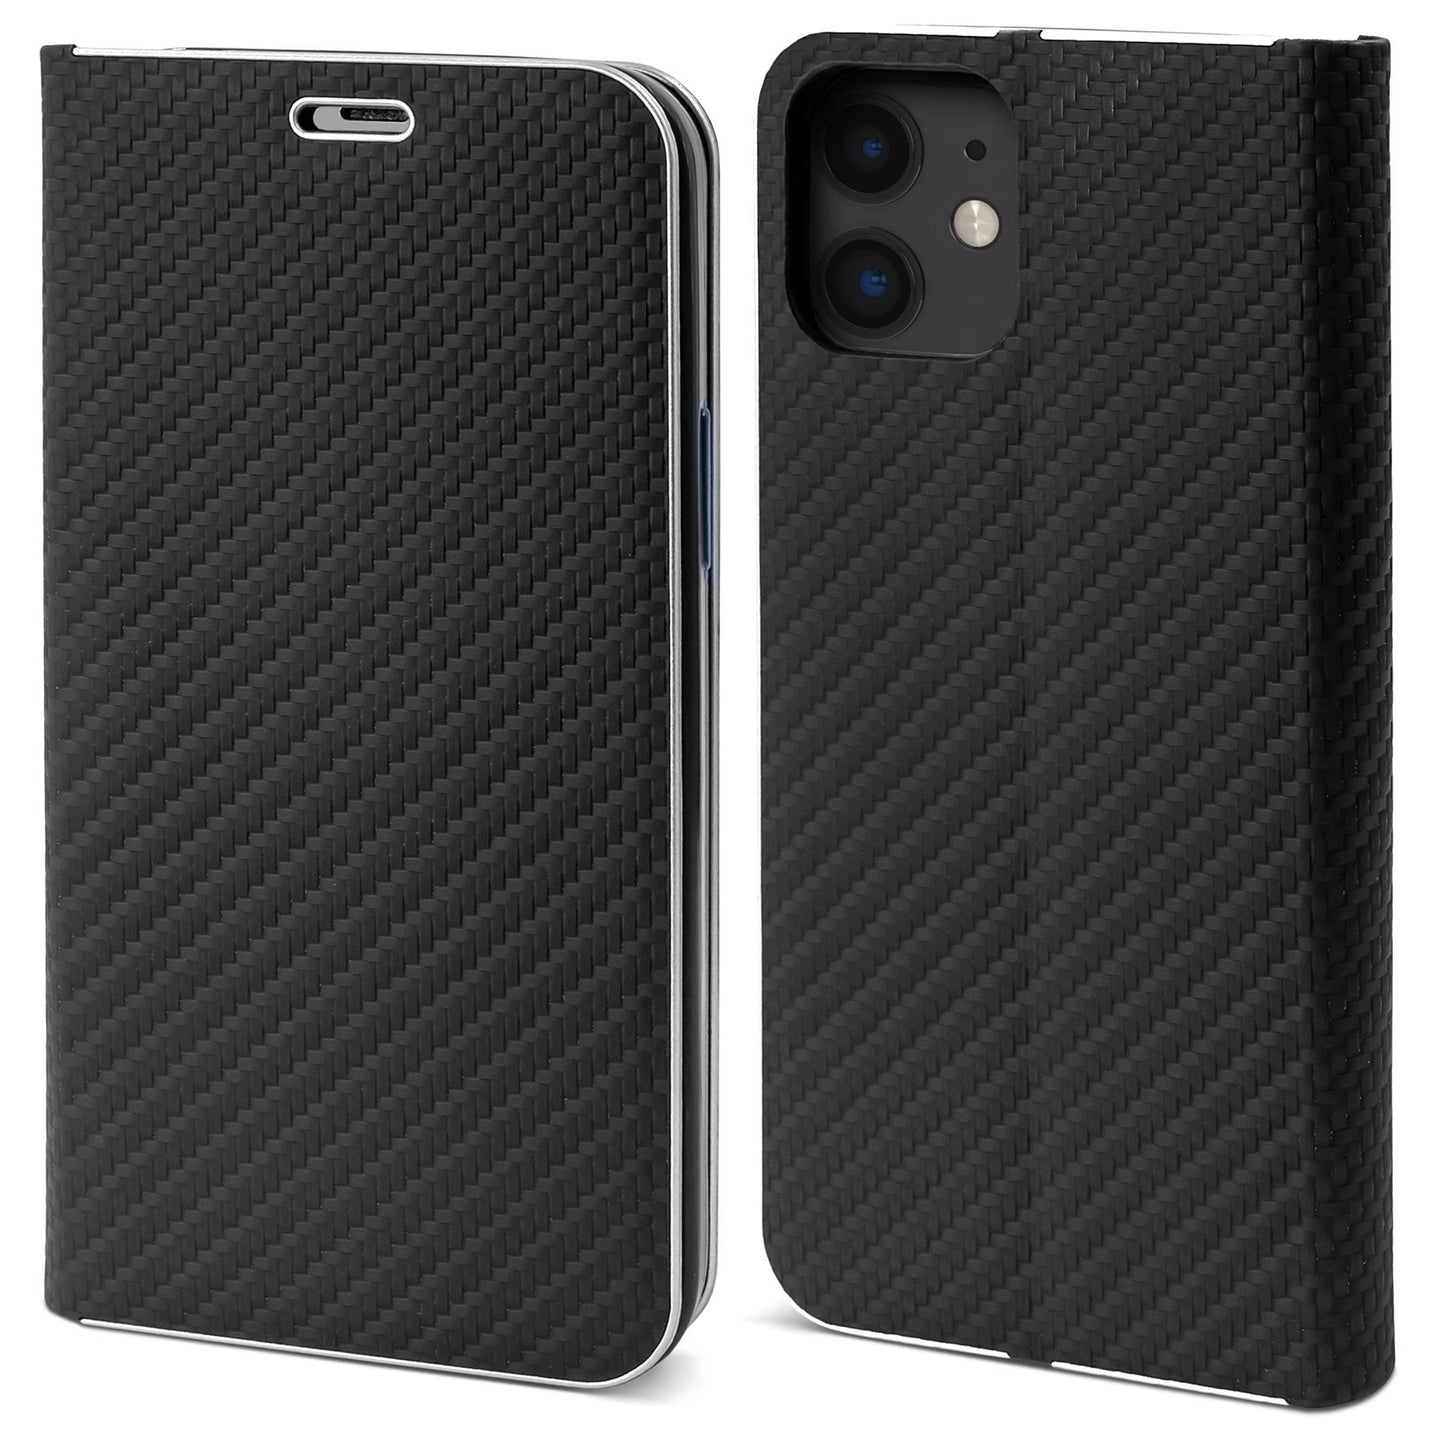 Moozy Wallet Case for iPhone 12, iPhone 12 Pro, Black Carbon – Metallic Edge Protection Magnetic Closure Flip Cover with Card Holder